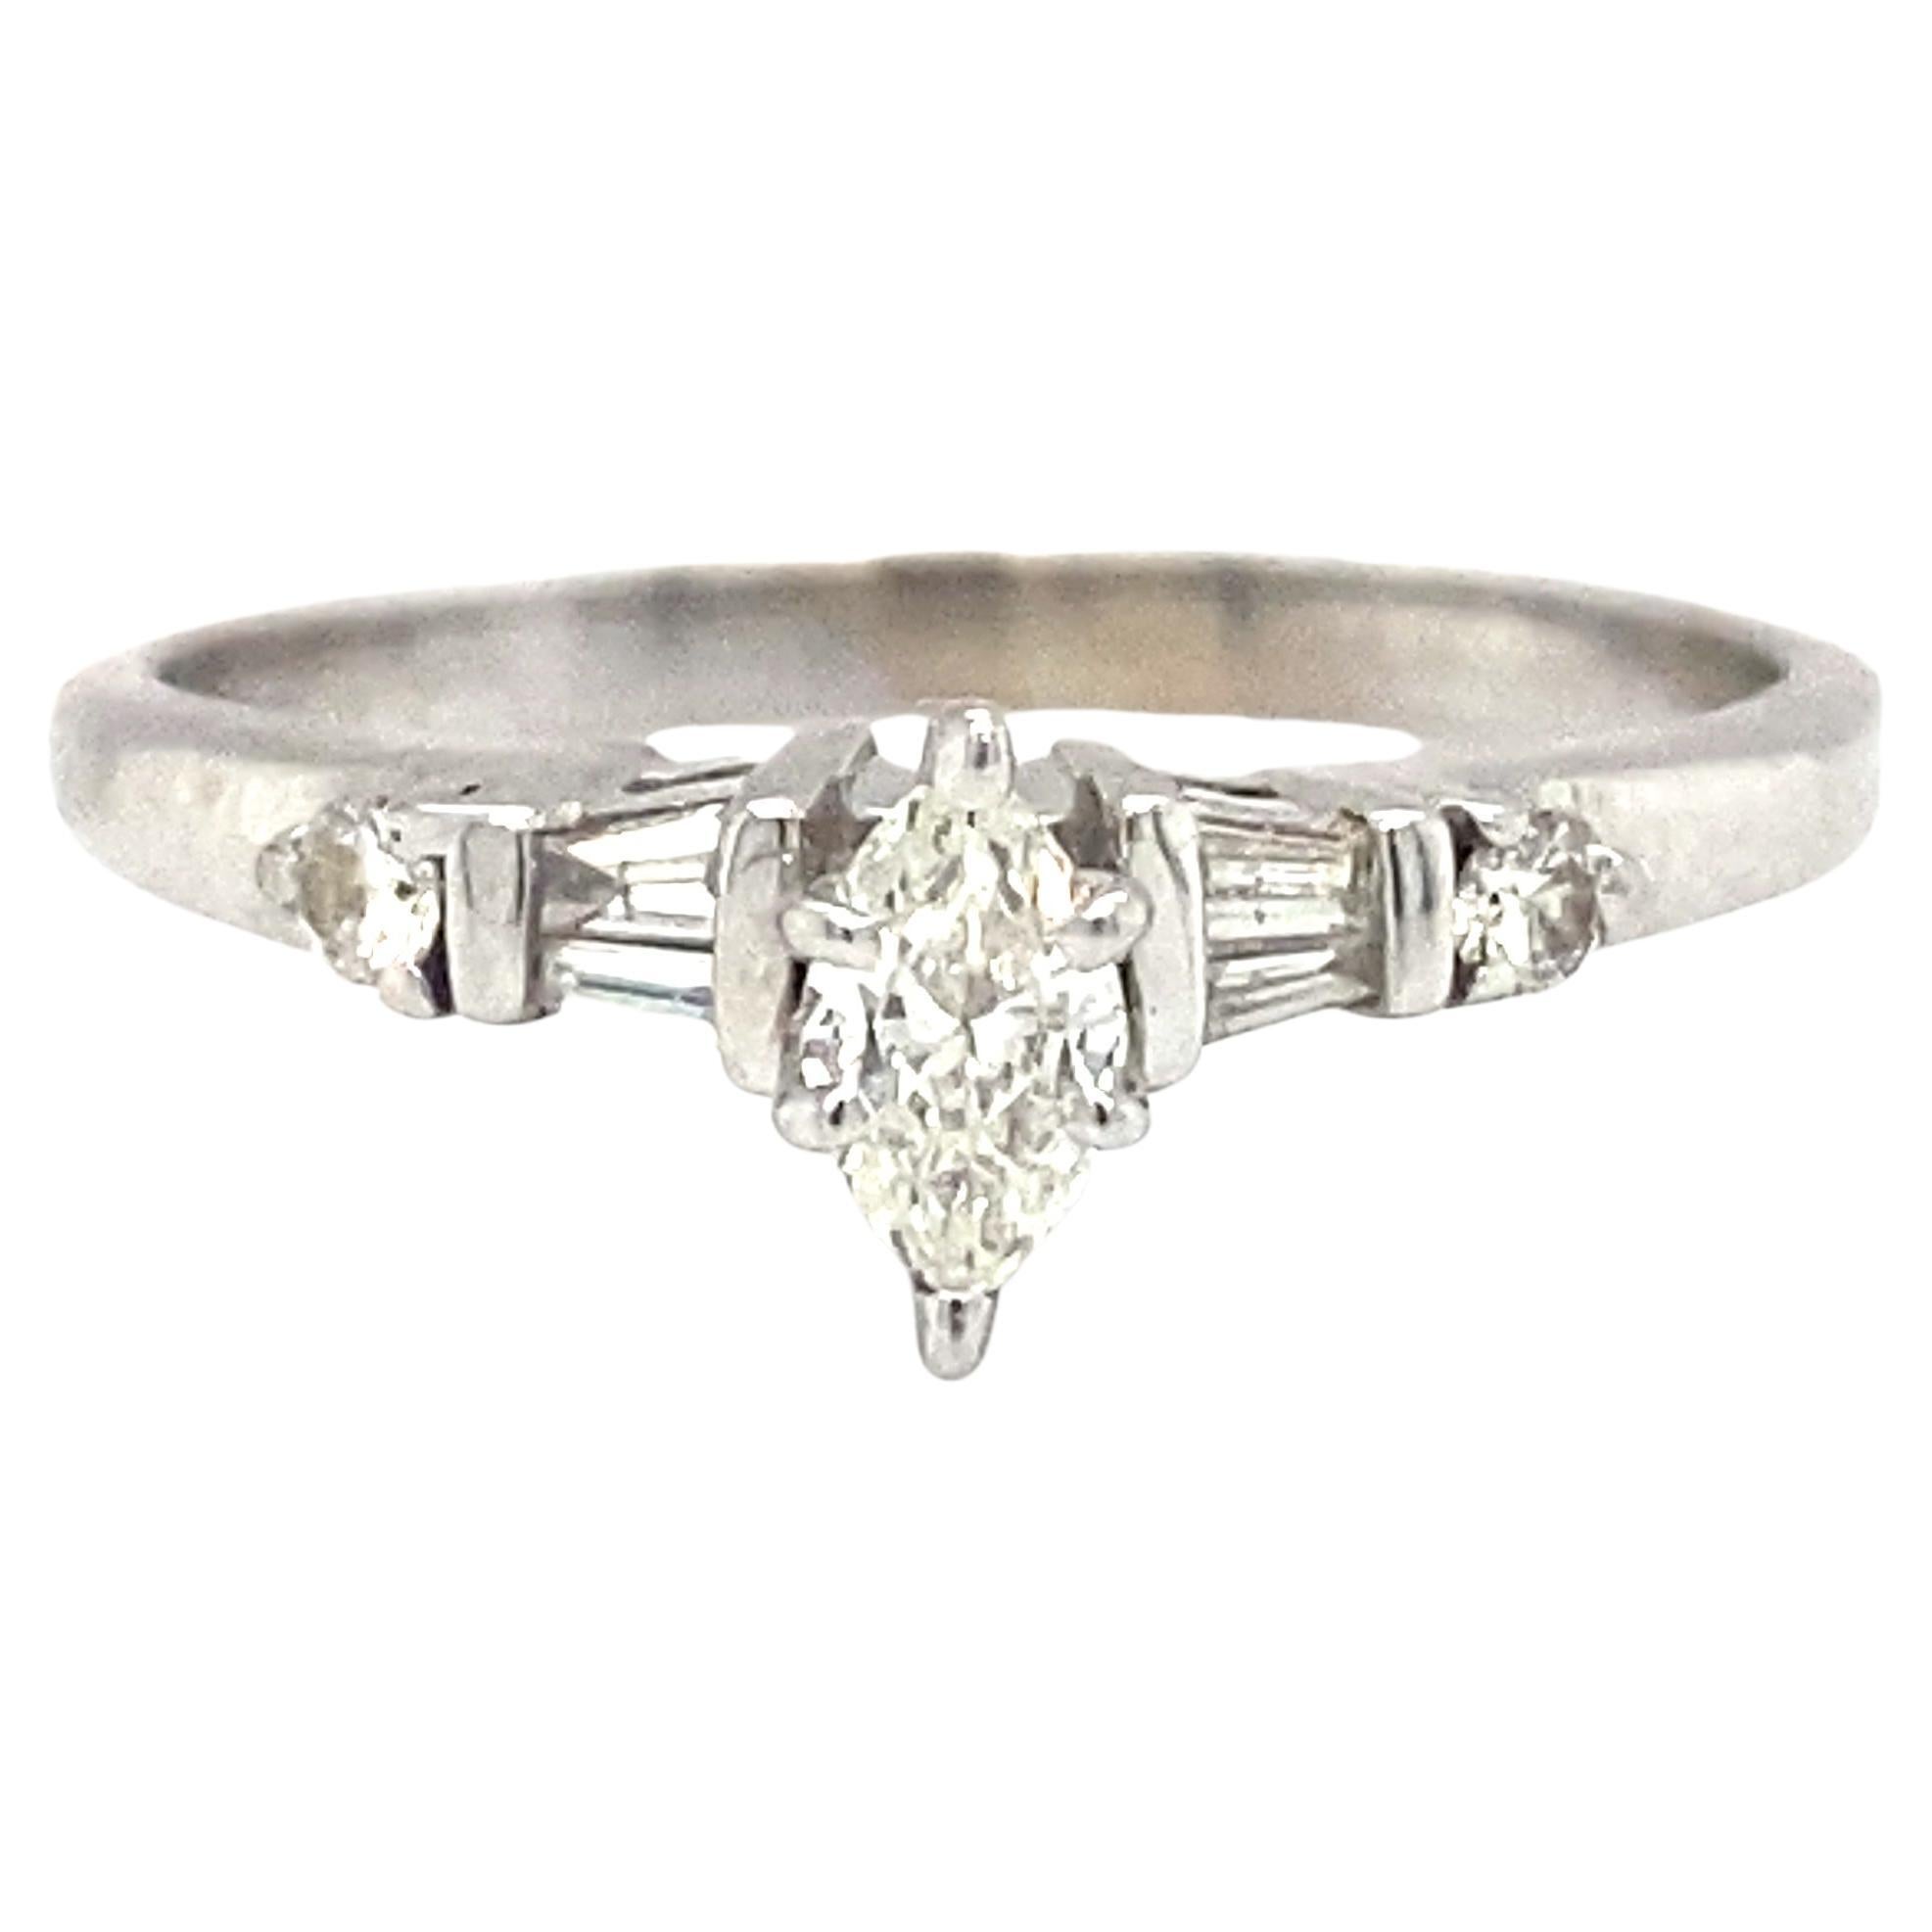 Circa 1950s 0.25ct Marquise Diamond Engagement Ring in 14K White Gold